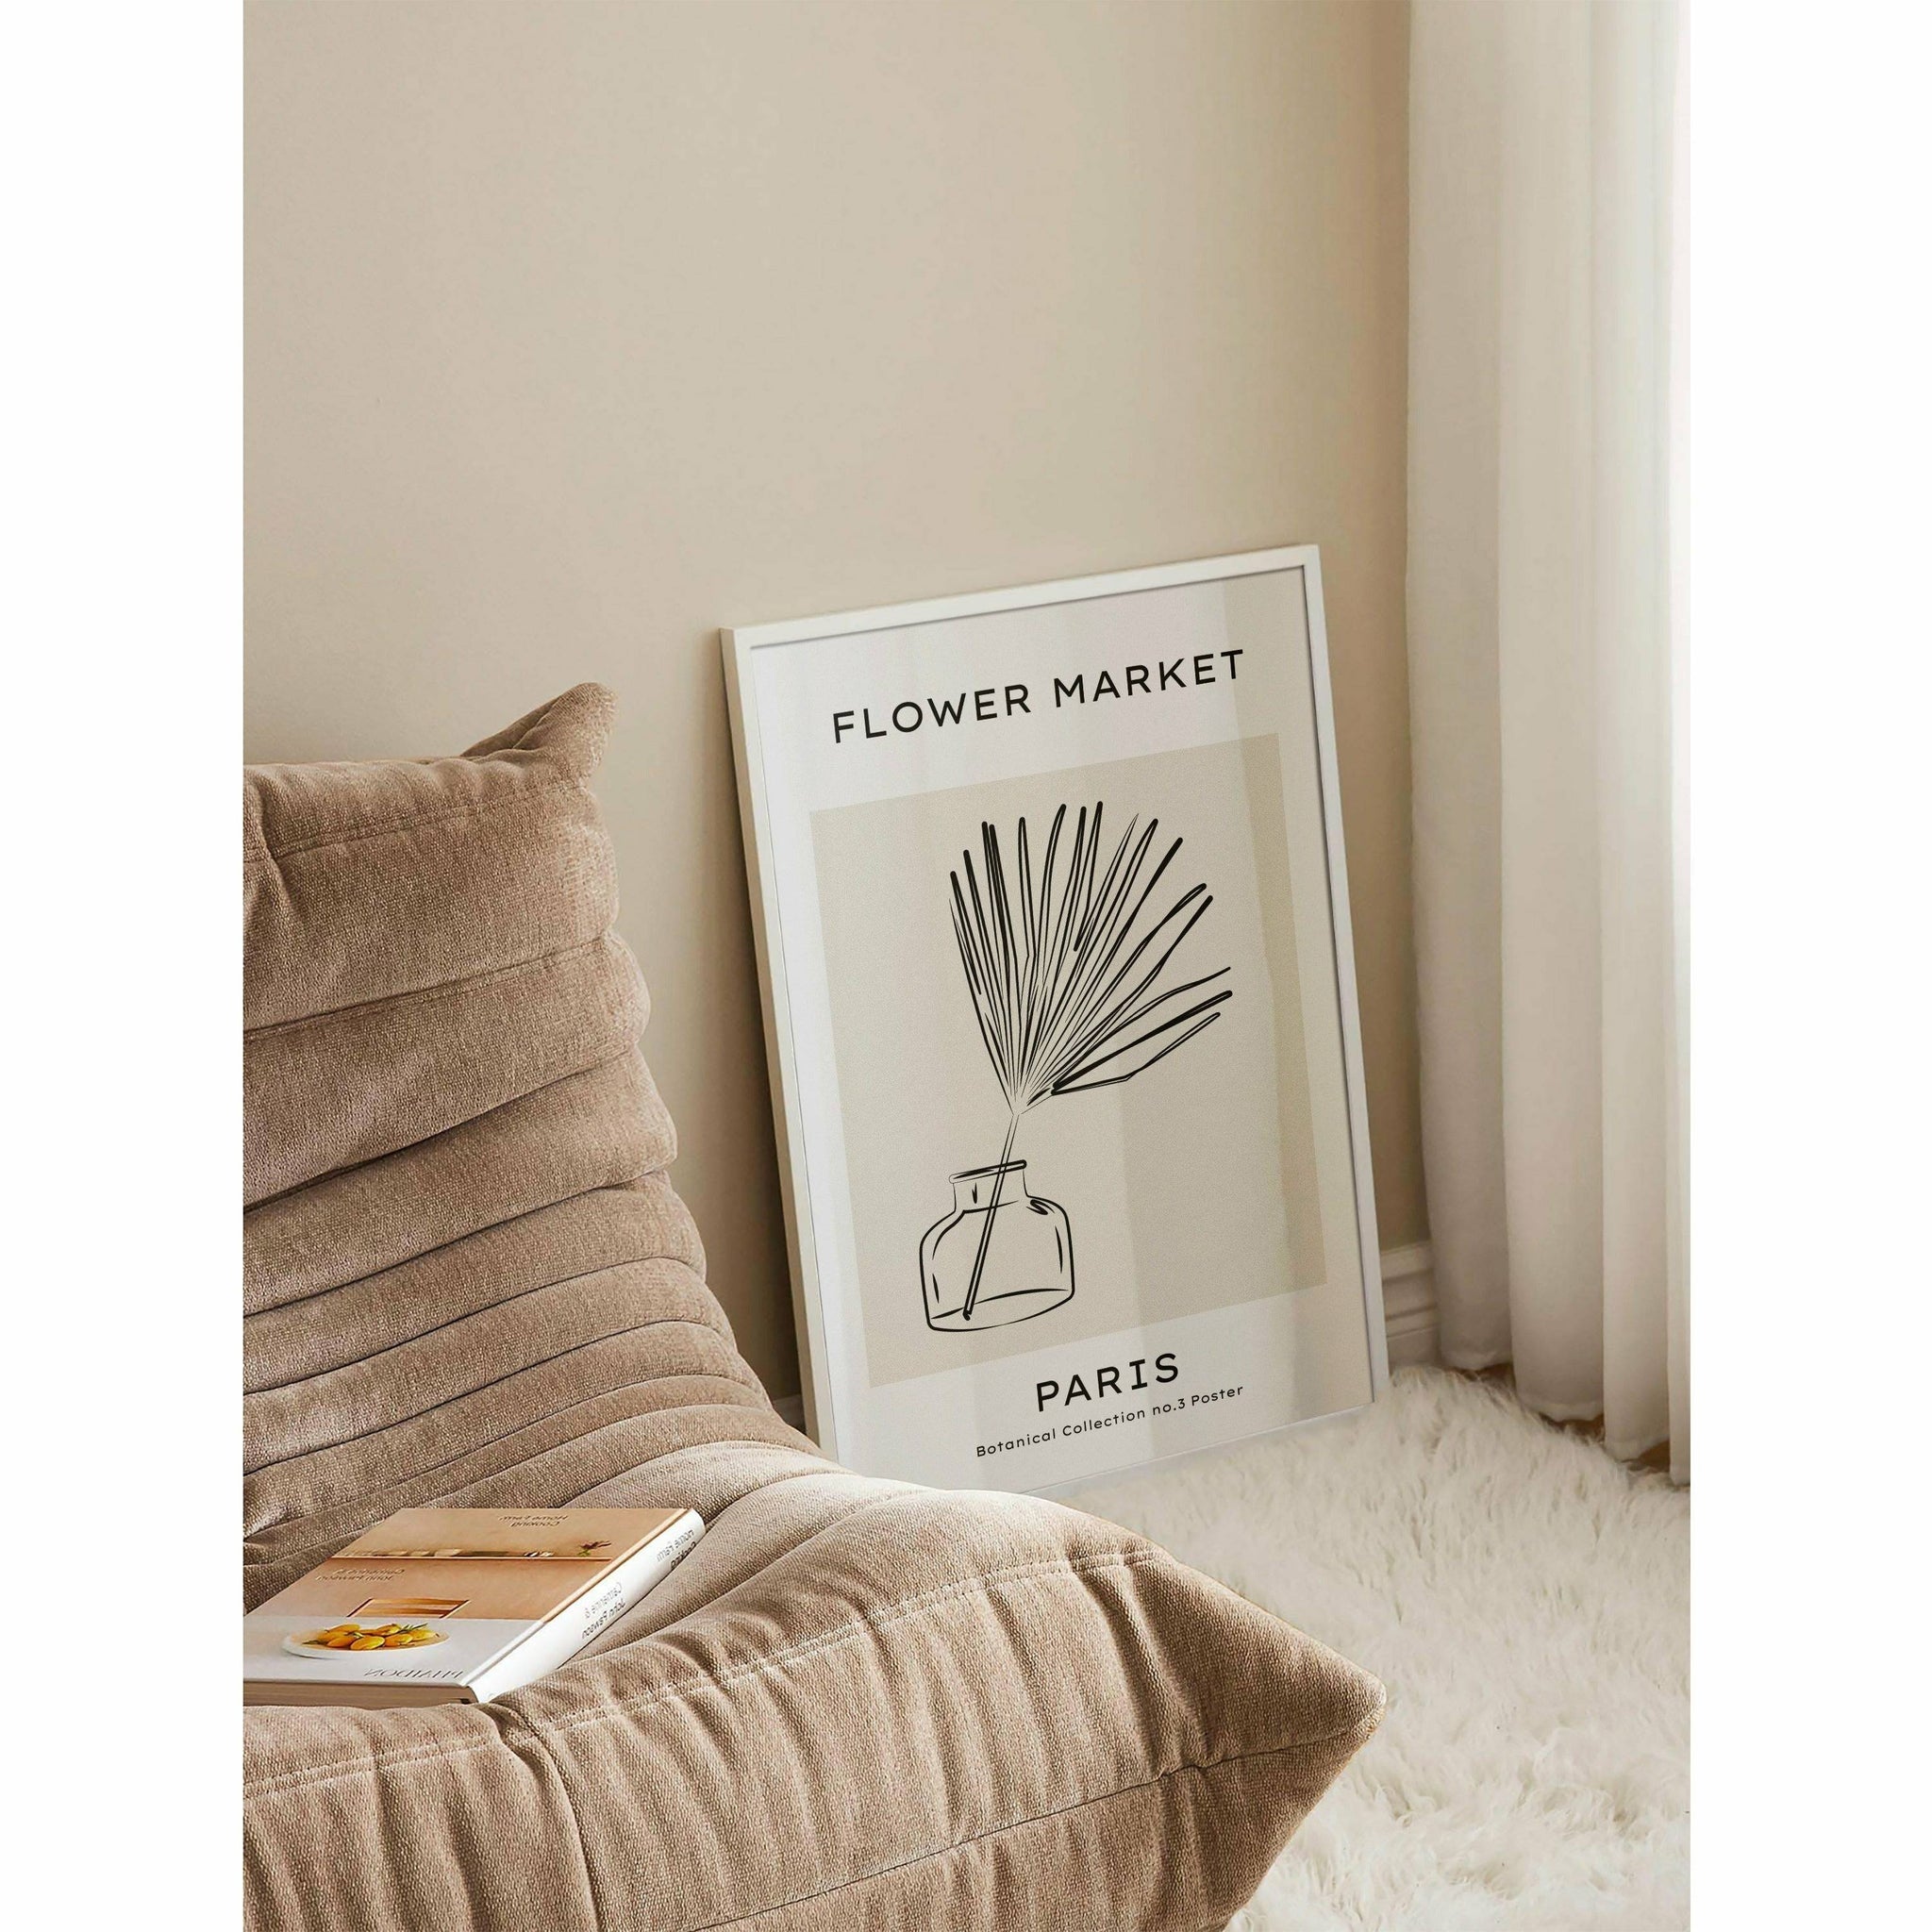 Botanical Collection Palm Poster